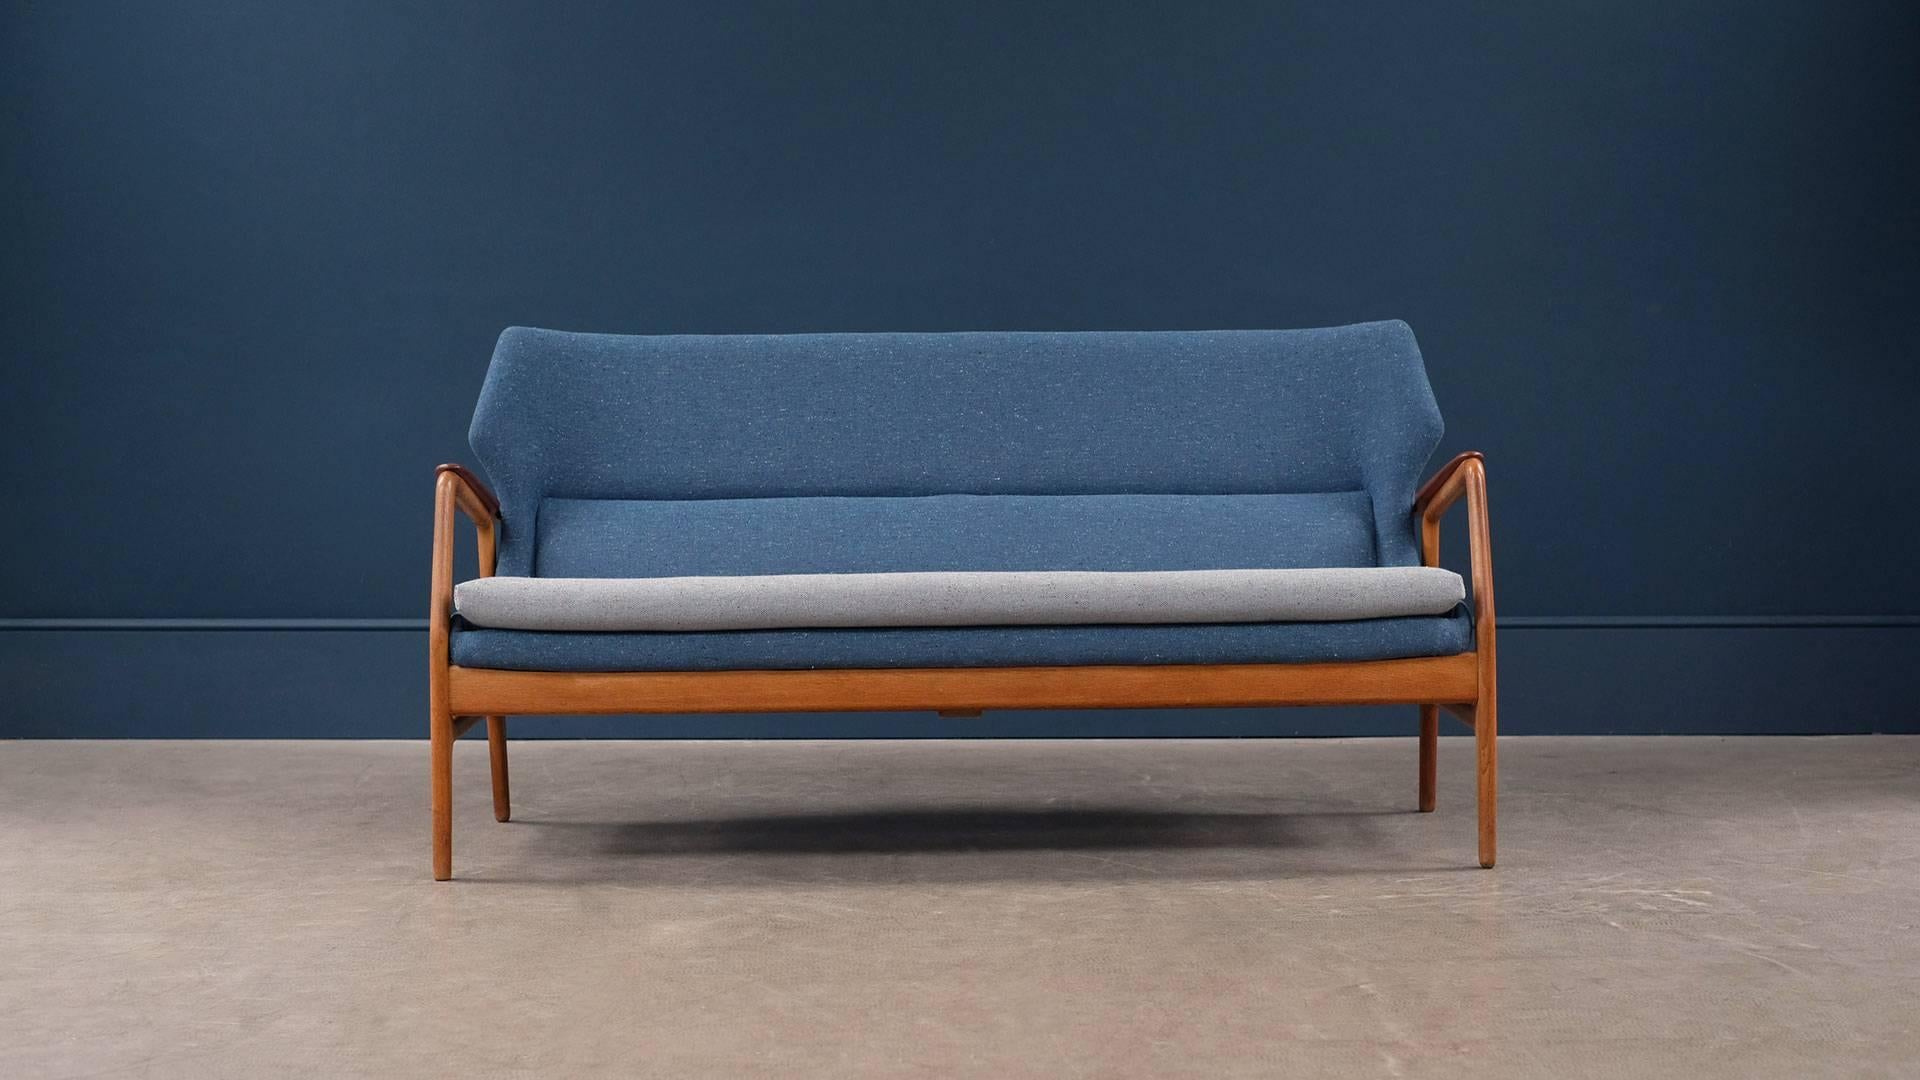 Sofa in solid oak with contrasting teak arms and back rail, designed by Aksel Bender Madsen for Bovenkamp. Fully reconditioned with new blue / grey upholstery.
 